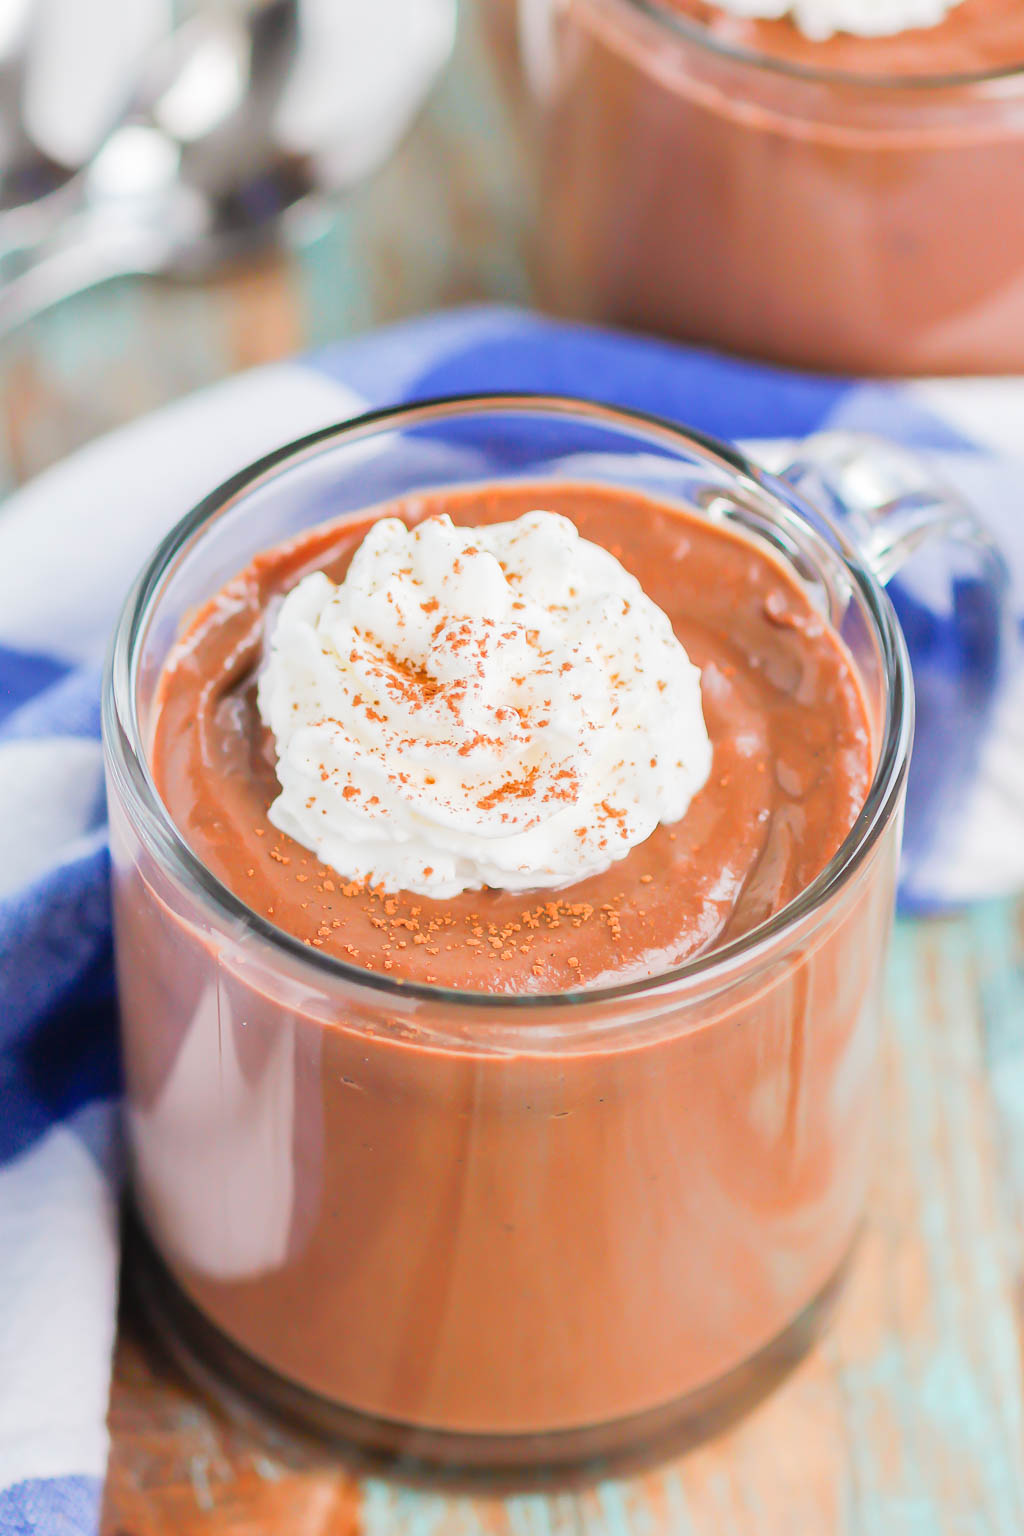 A glass jar of chocolate pudding from scratch, topped with whipped cream. 